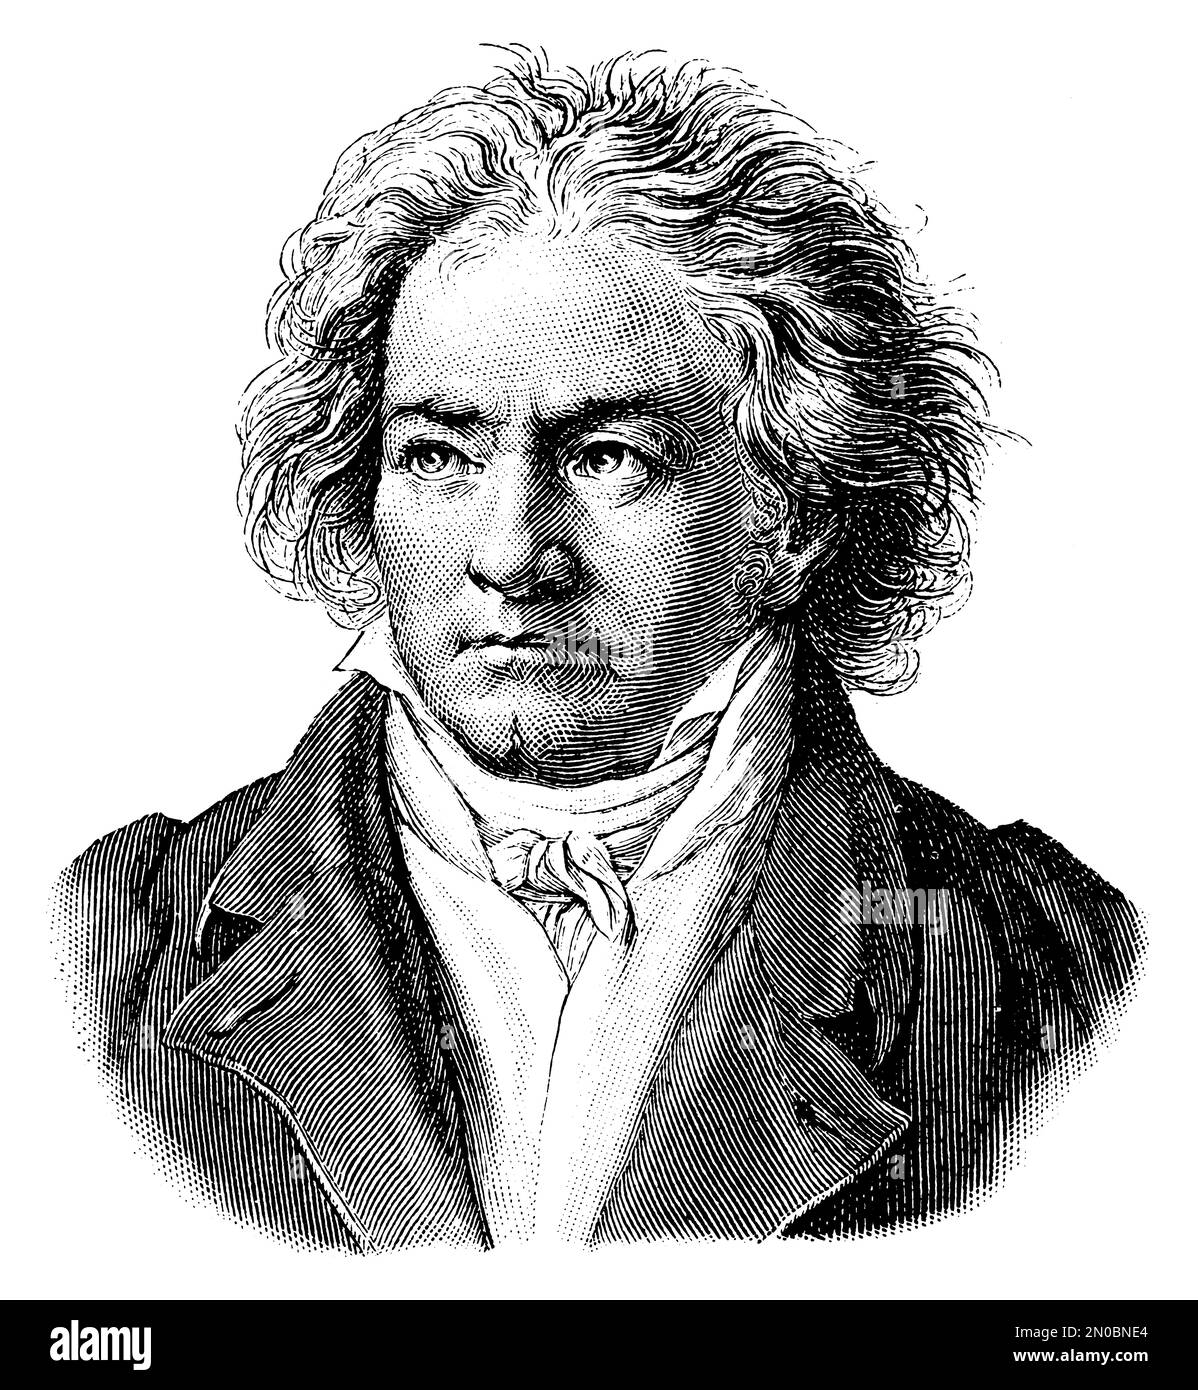 Antique 19th-century engraving of a portrait of Ludwig van Beethoven (isolated on white). German composer and pianist. Born on December 17, 1770 in Bo Stock Photo